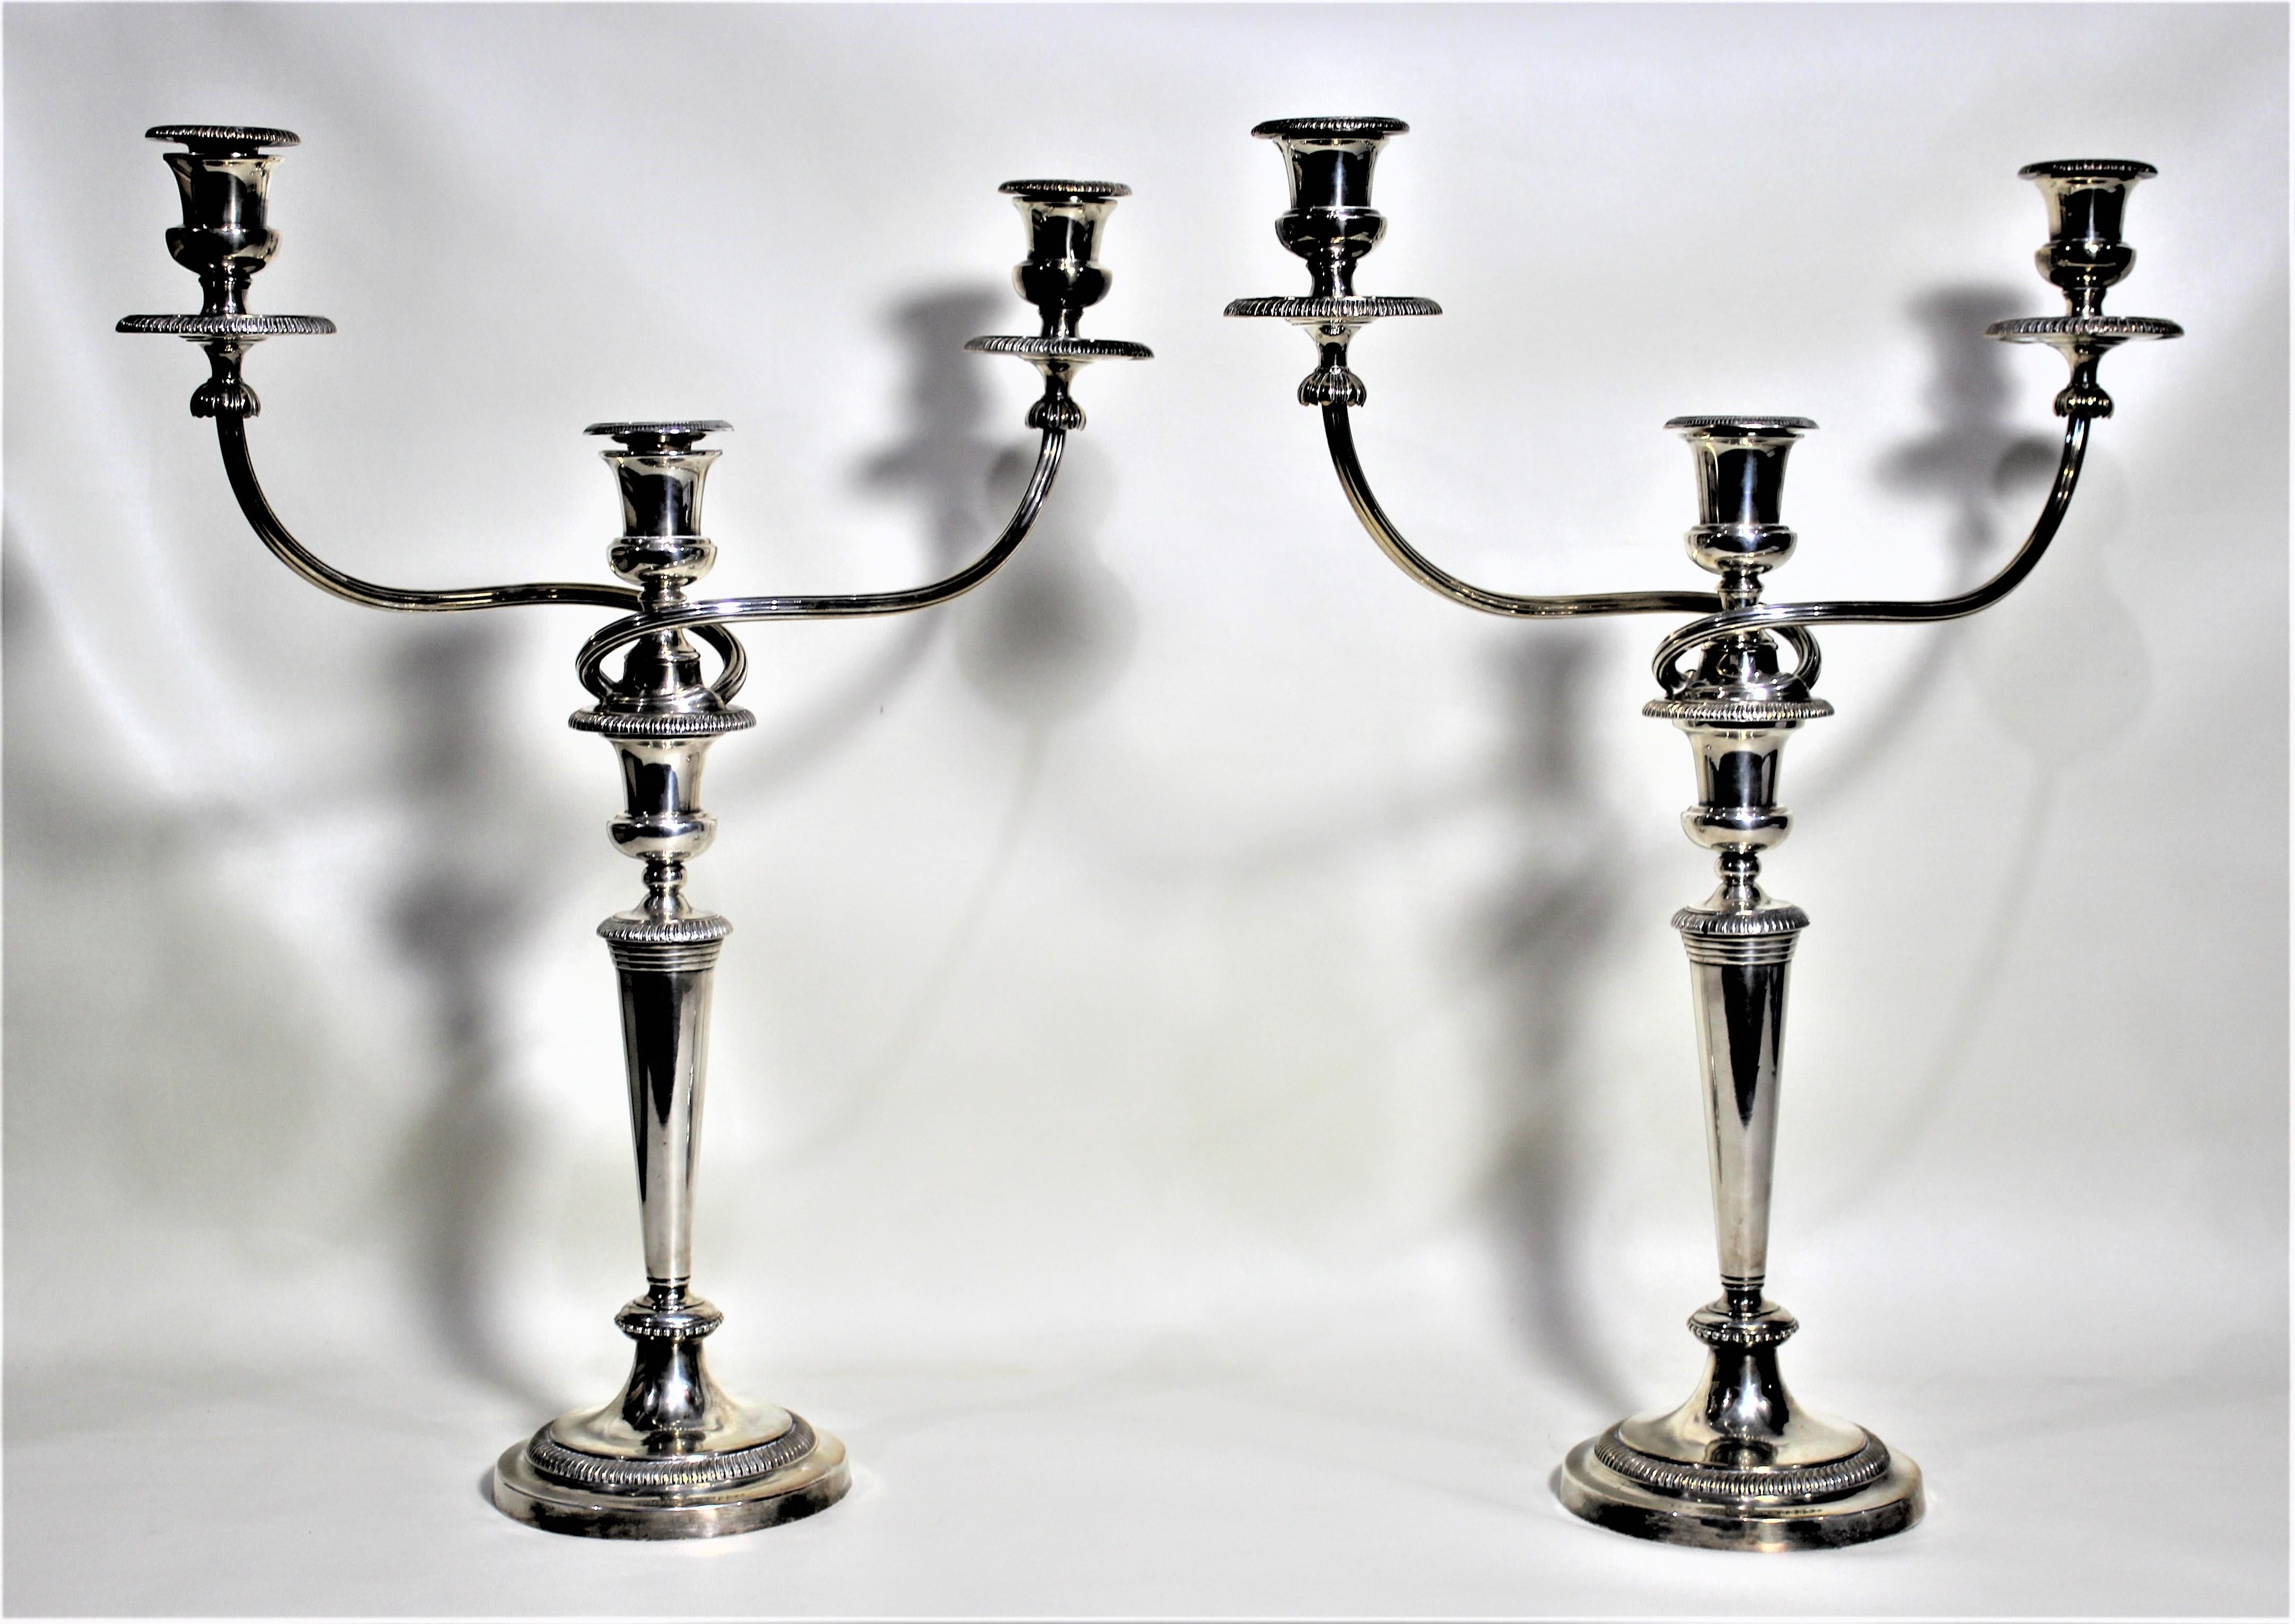 Dating from the mid-19th century, this pair of silver plated candelabras were made by the renowned silversmith, Mathew Bolton of Sheffield England. As presented in the photos, this set is convertible from impressive three branch candelabras to